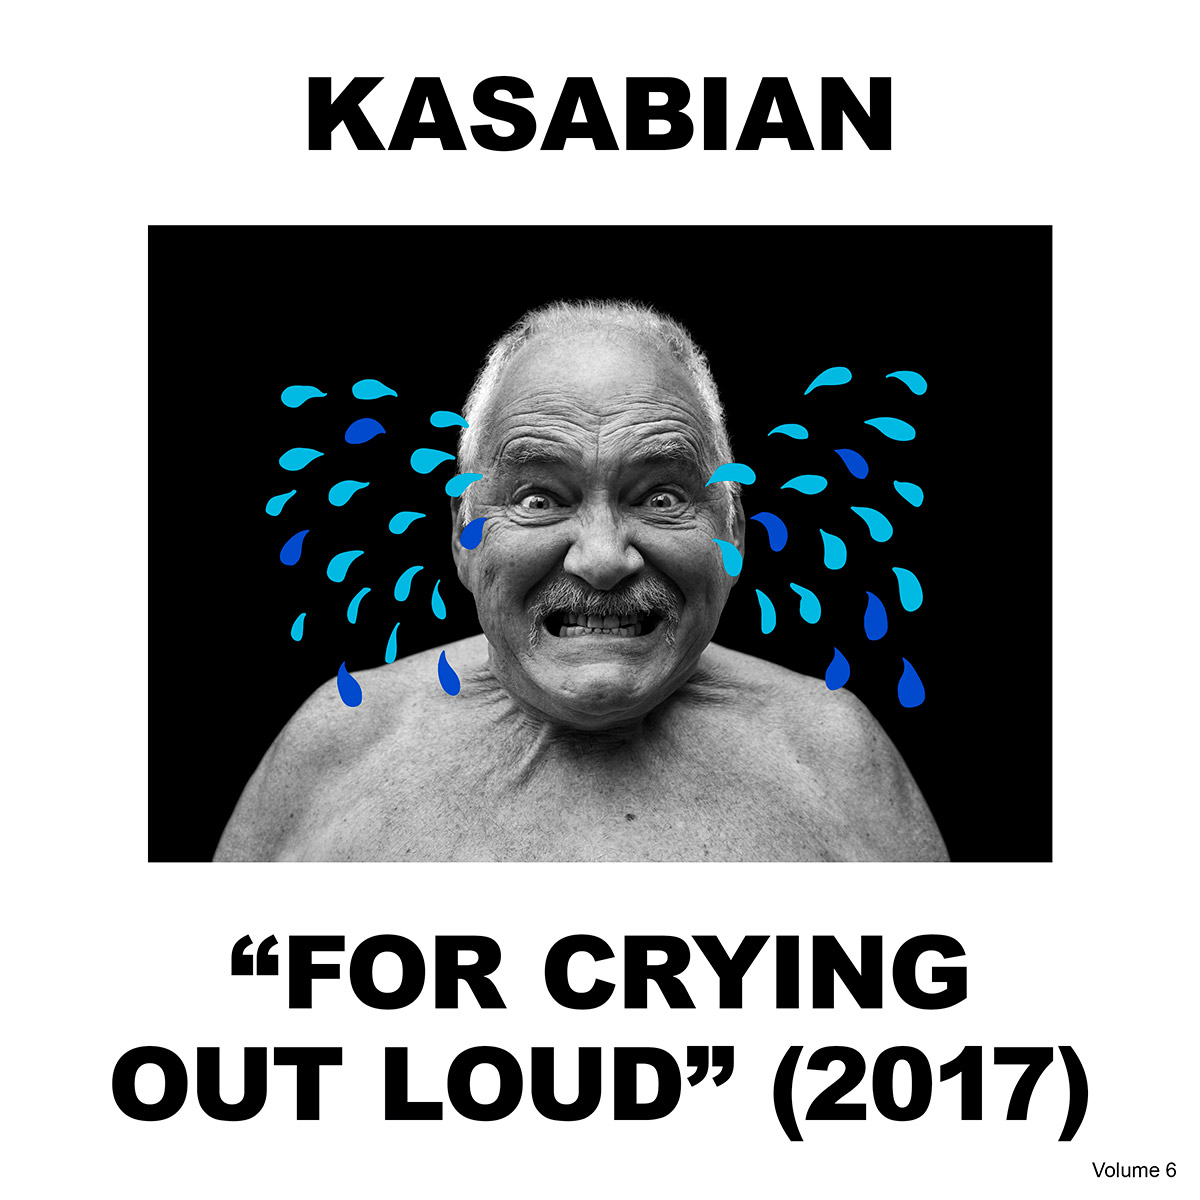 For Crying Out Loud